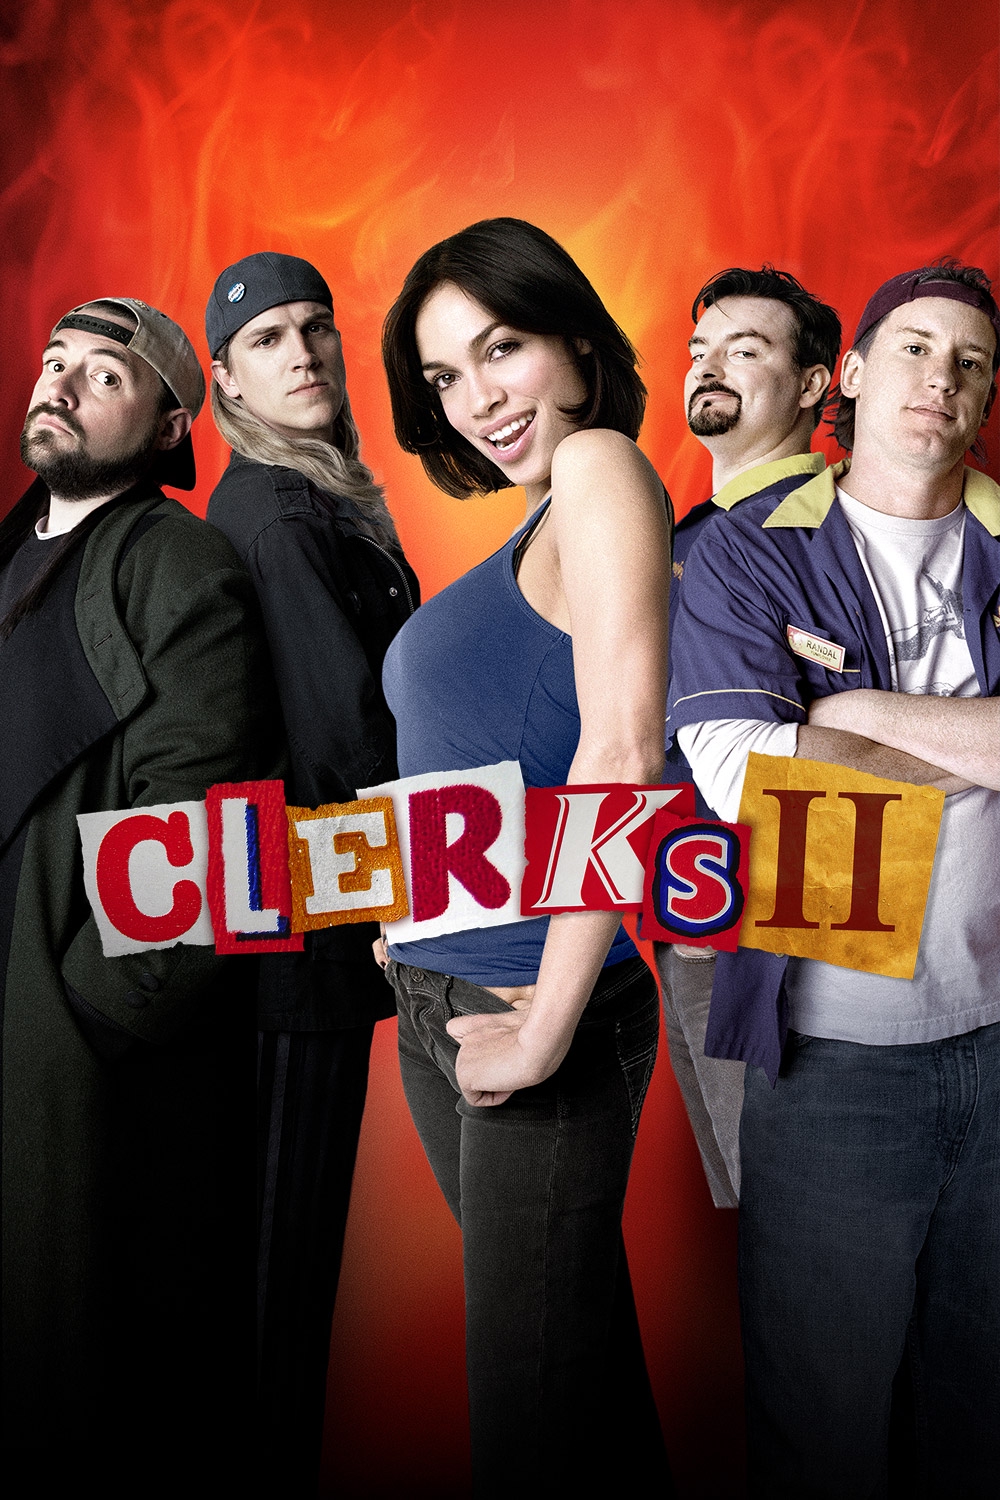 Seattle DJC.com local business news and data - Weekend - After Hours: Watch  Clerks III with Kevin Smith